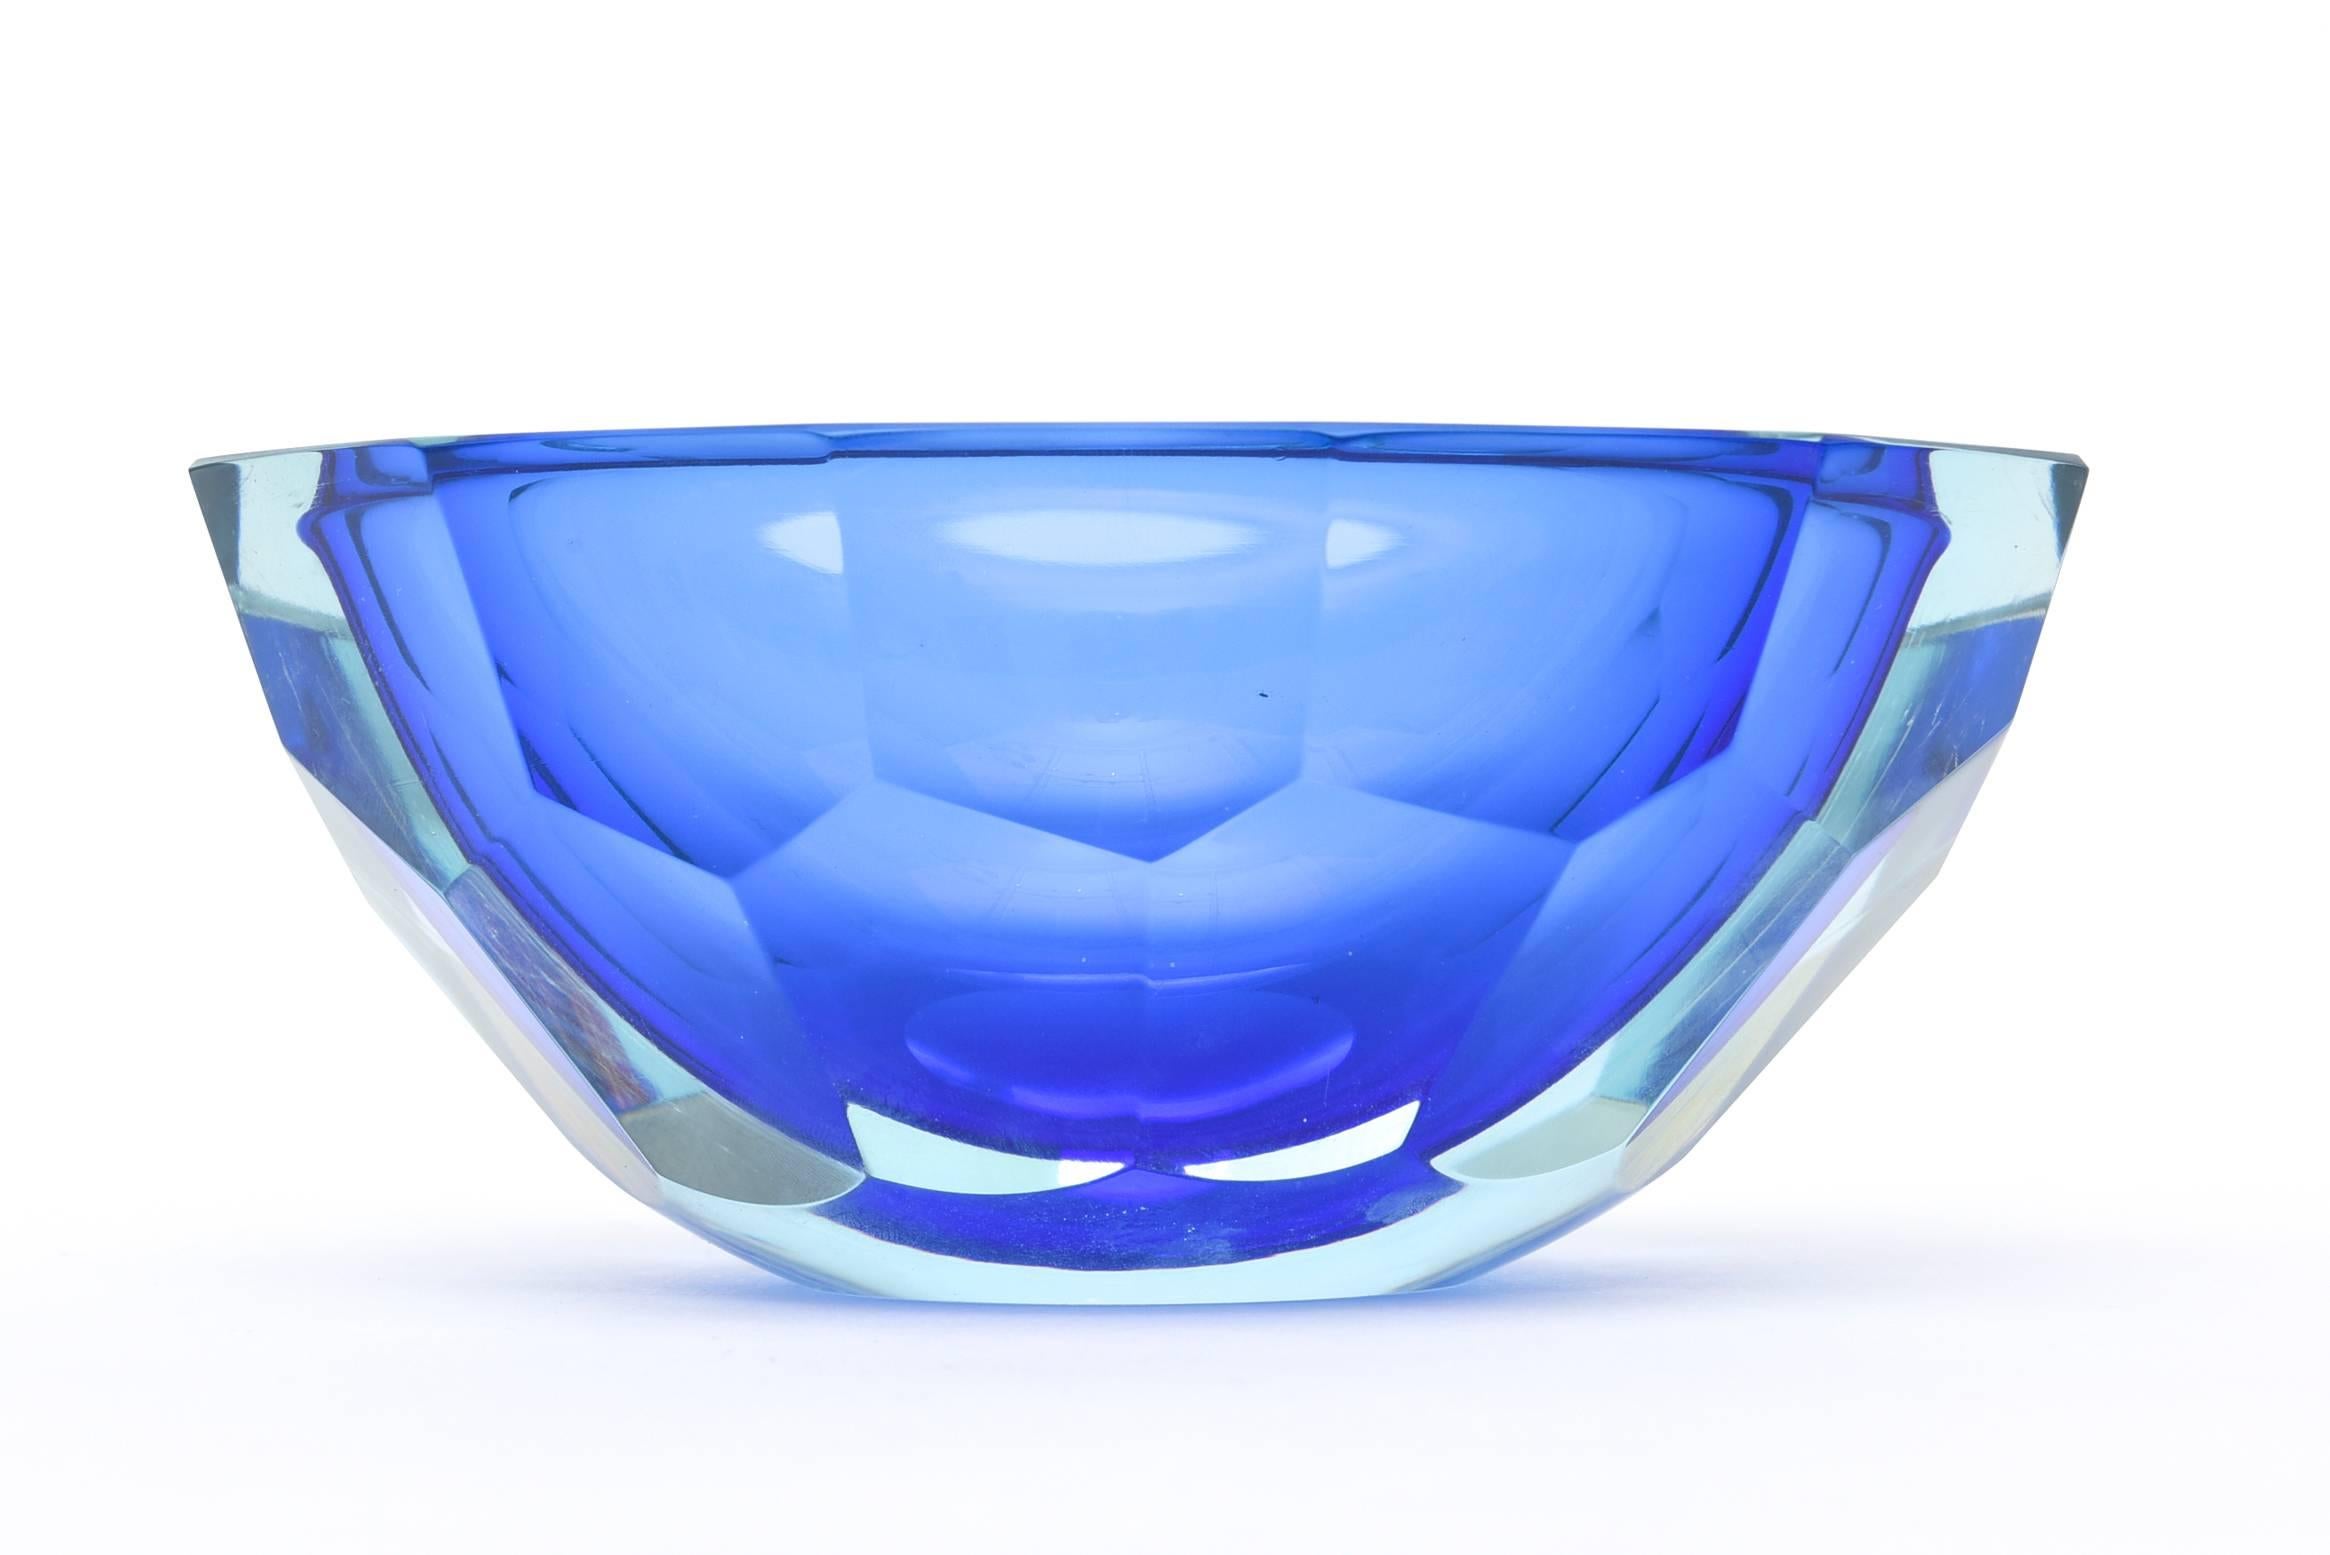 Italian Murano Sommerso Diamond Faceted Flat Cut Polished Glass Geode Bowl 1